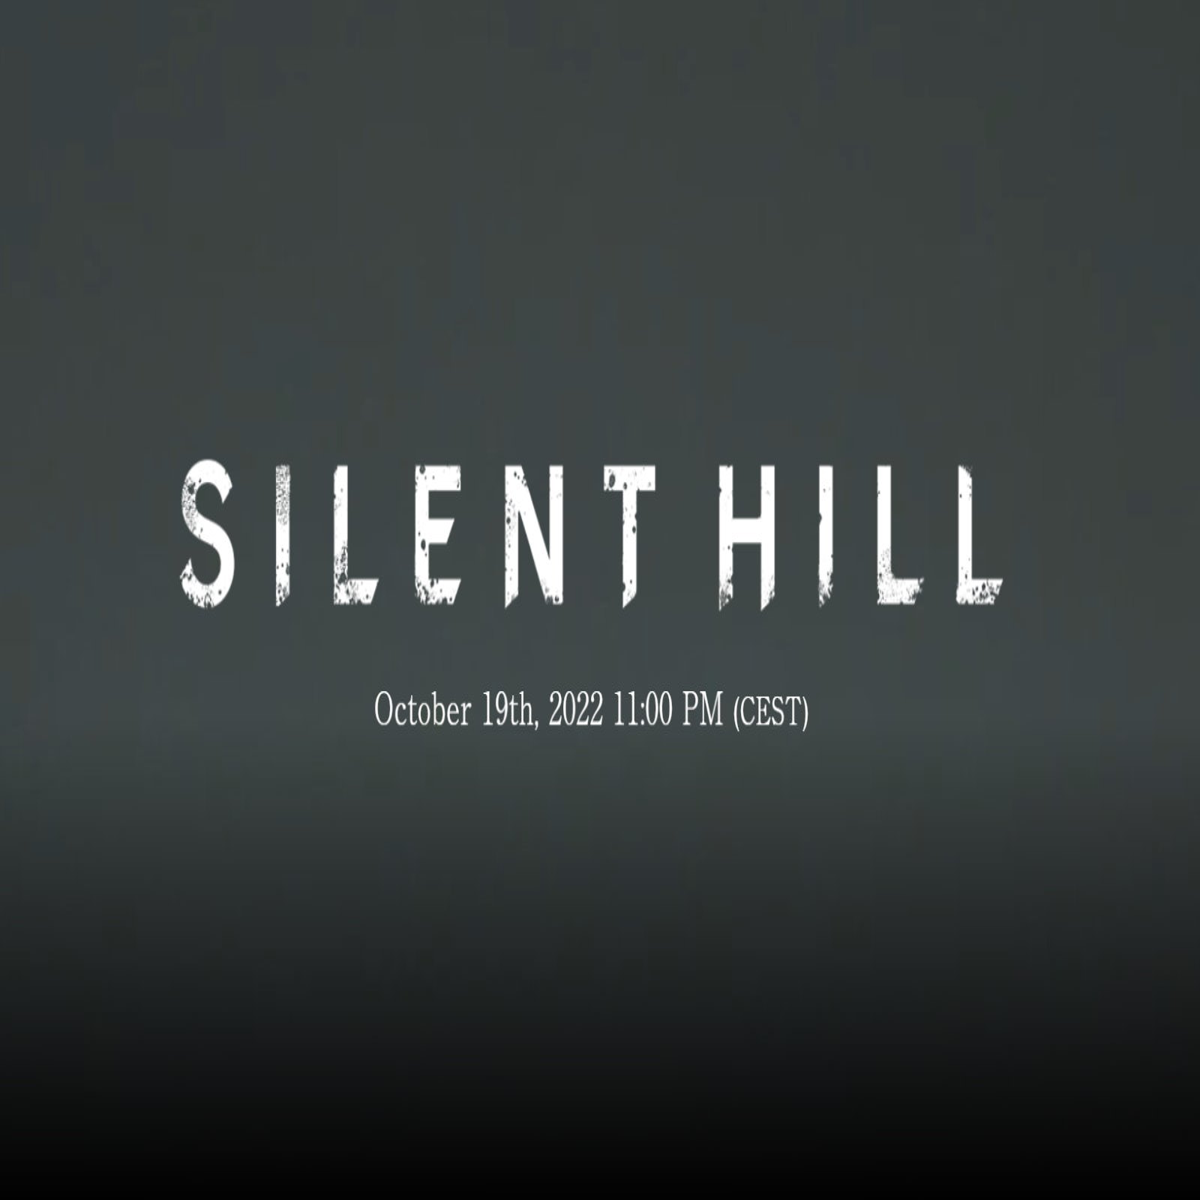 Silent Hill 2 and other announcements from the Silent Hill stream